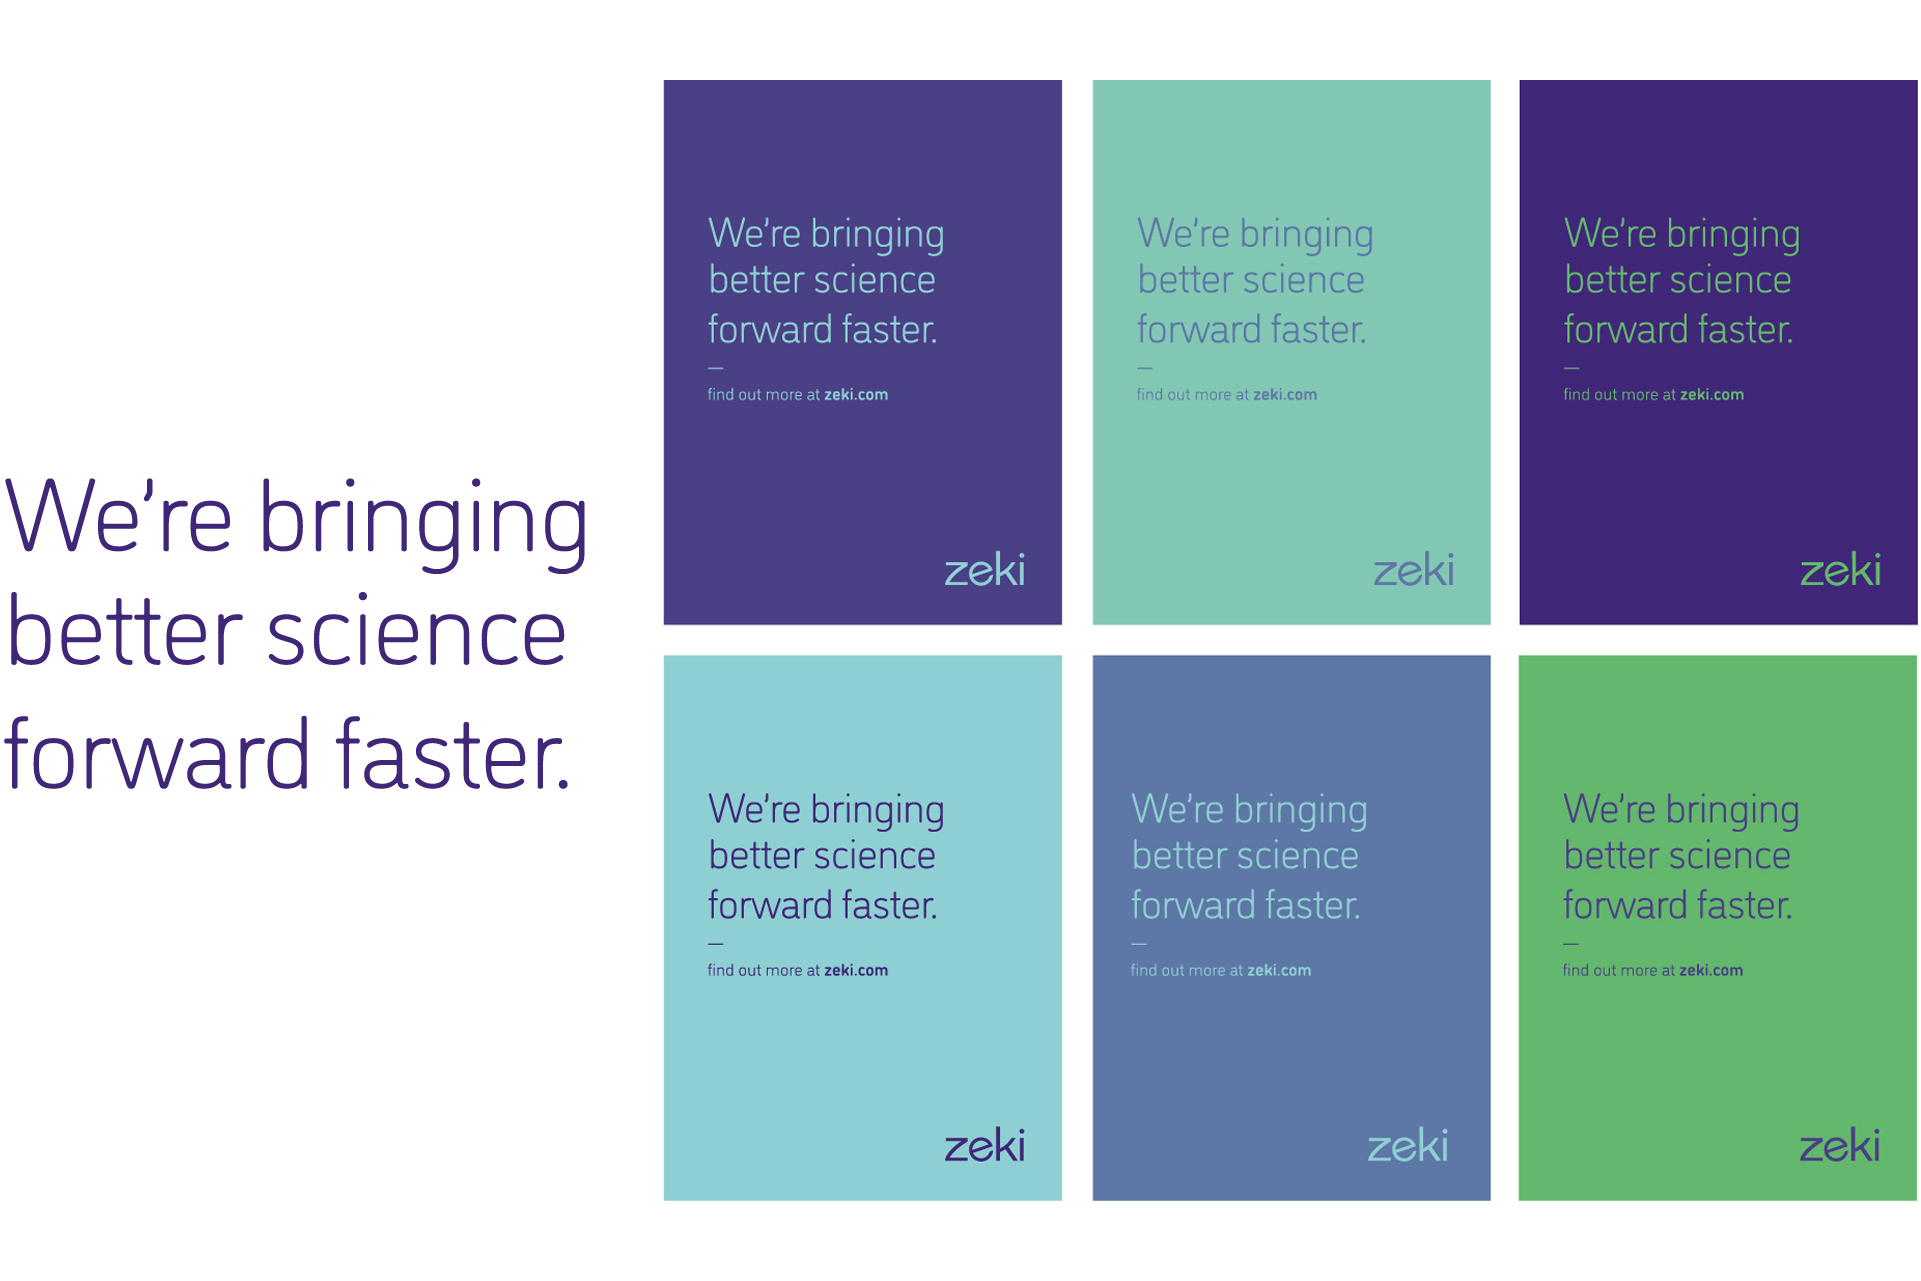 A graphic display of six rectangular cards in different shades of blue and green, each bearing the text "We’re bringing better science forward faster." The logo and website "zeki.com" appear at the bottom of each card. The same text is repeated on the left side of the image.